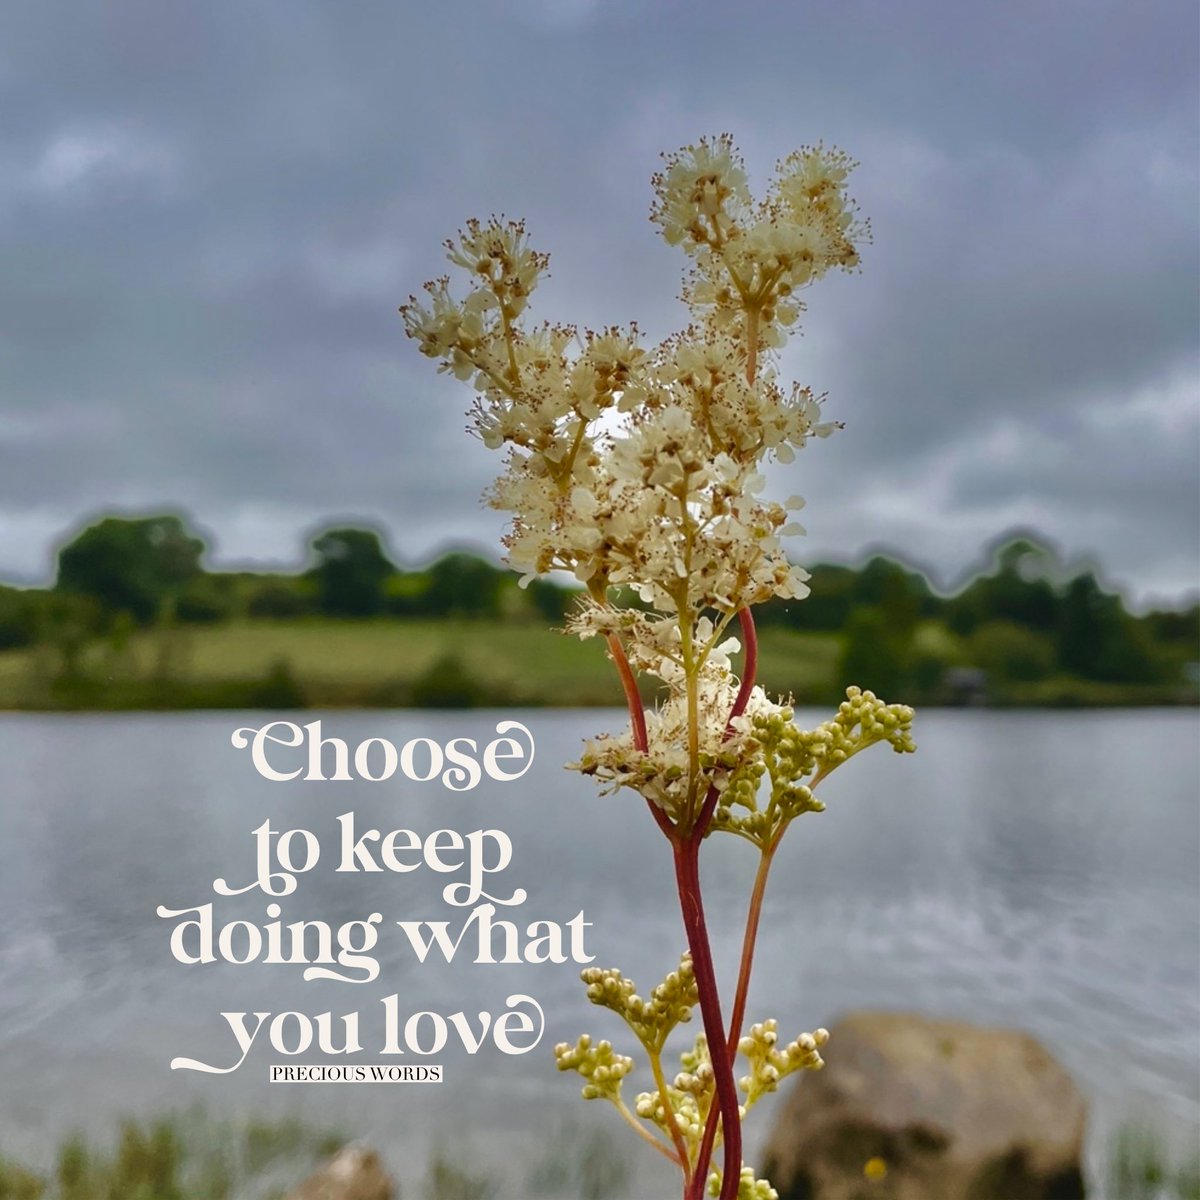 Choose to keep doing what you love. For me, I love Sunday with family outdoors and taking photos I can use to inspire.
#meadowsweet #choosetodowhatyoulove #choosehappiness #choosetoinspire #dowhatyoulovelovewhatyoudo #preciouswords #preciousdays